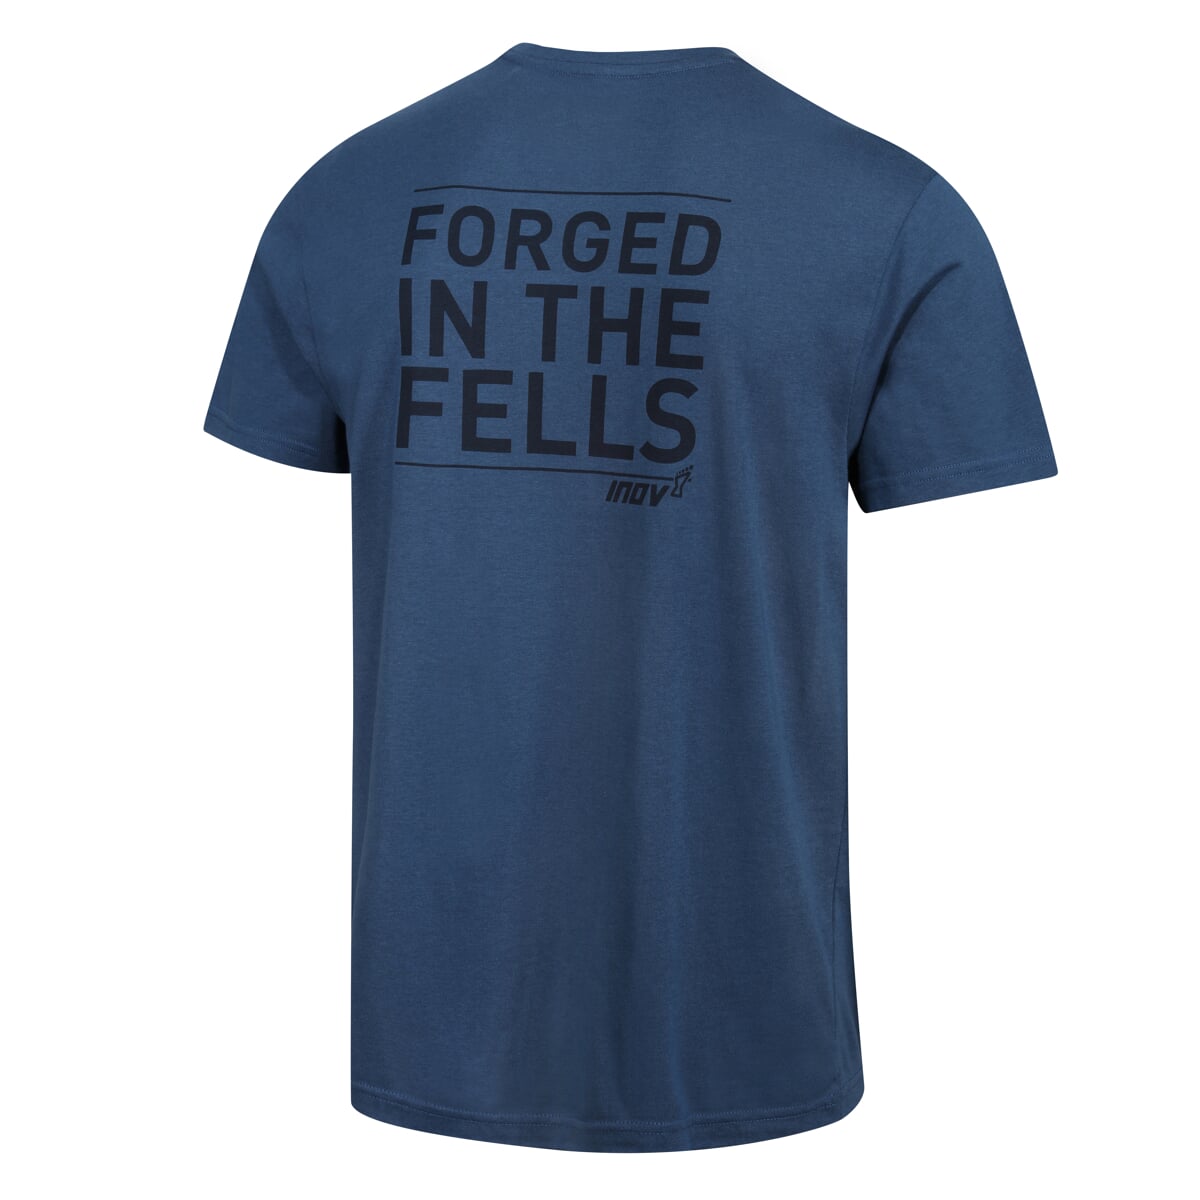 INOV-8 GRAPHIC TEE "FORGED" M